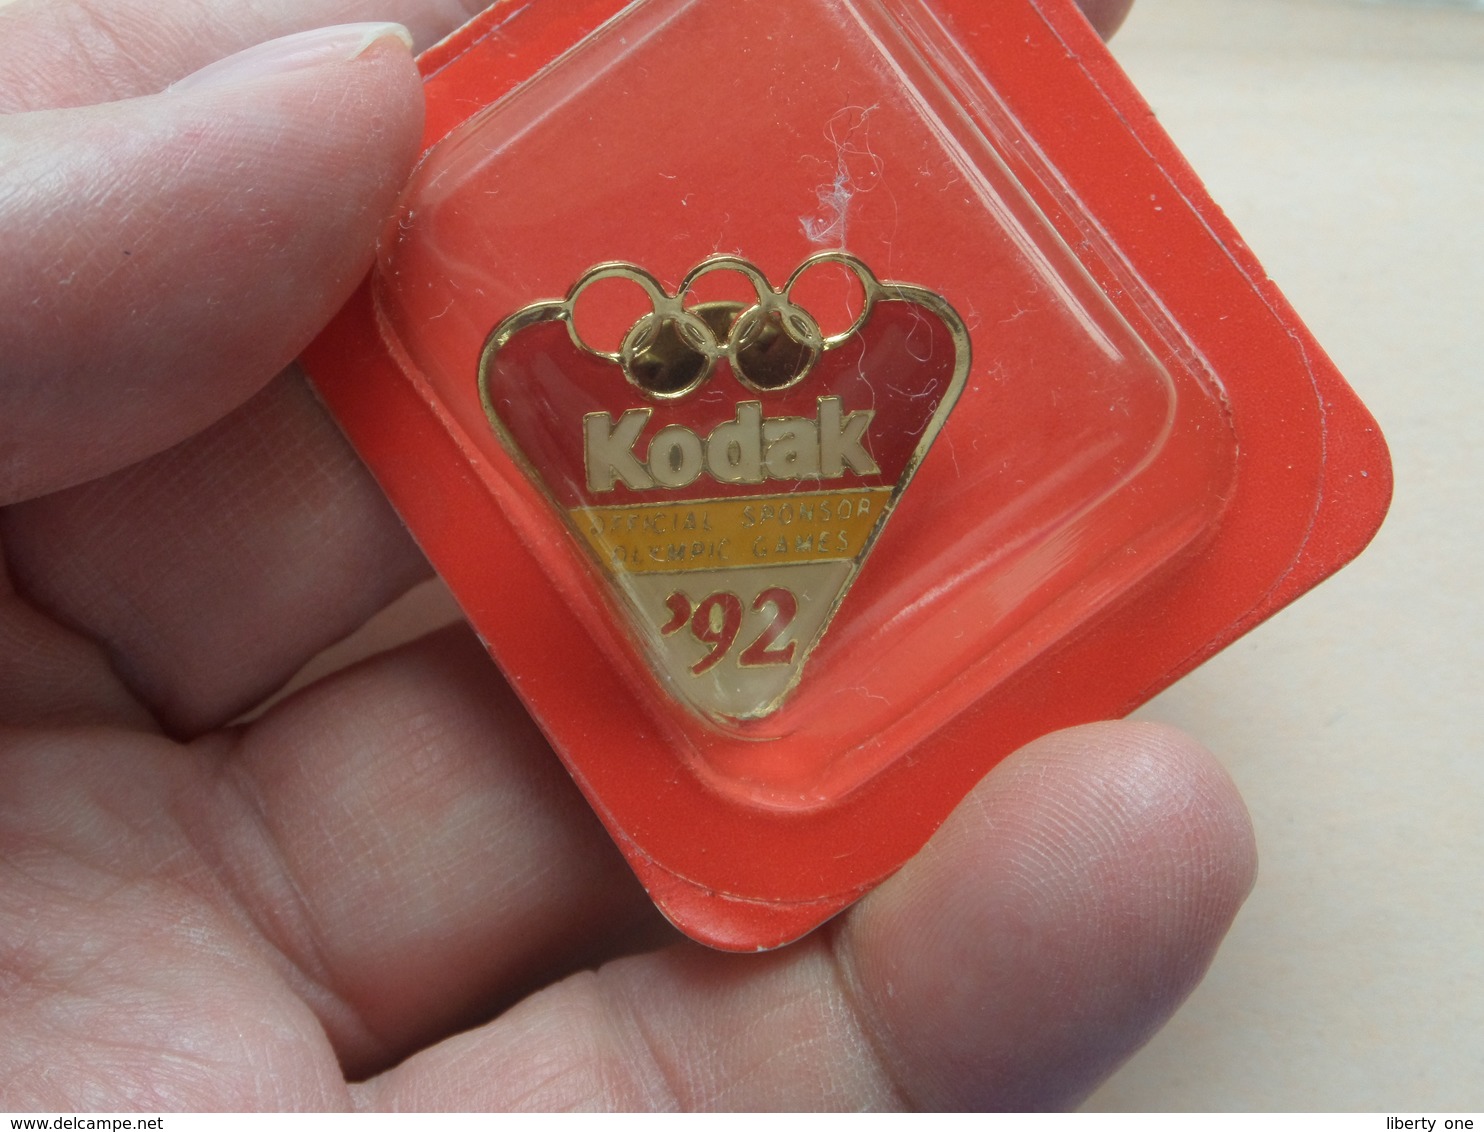 1992 - KODAK Official Sponsor Olympic Games '92 BARCELONA ( Zie Foto ) Pin - Brooch / Closed Box ! - Jeux Olympiques